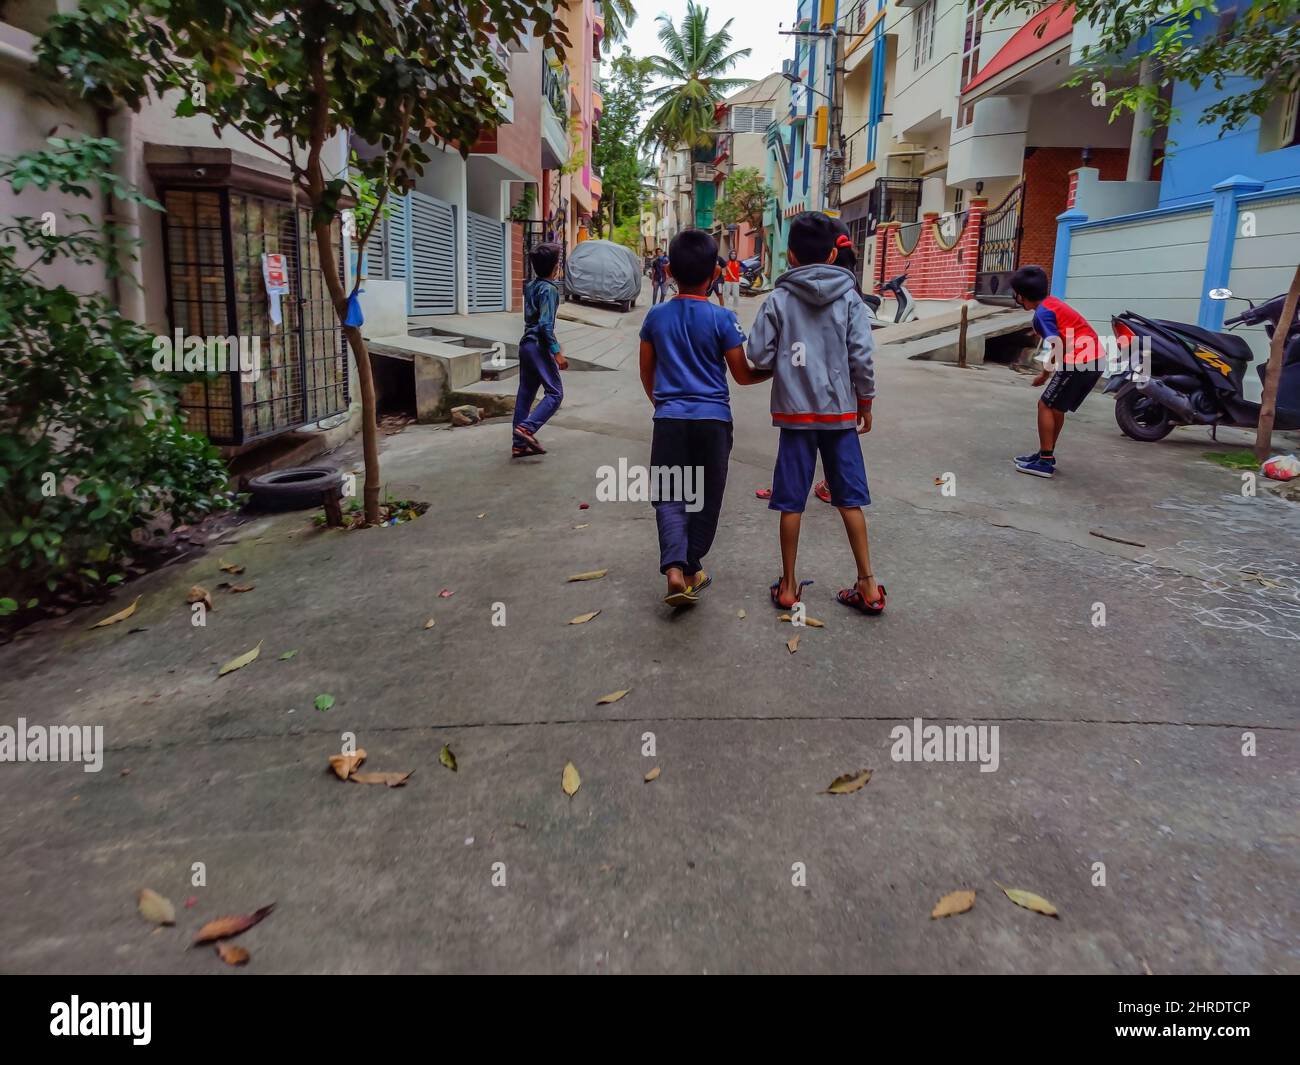 Group of kids playing cricket on the street in the residential area Stock Photo